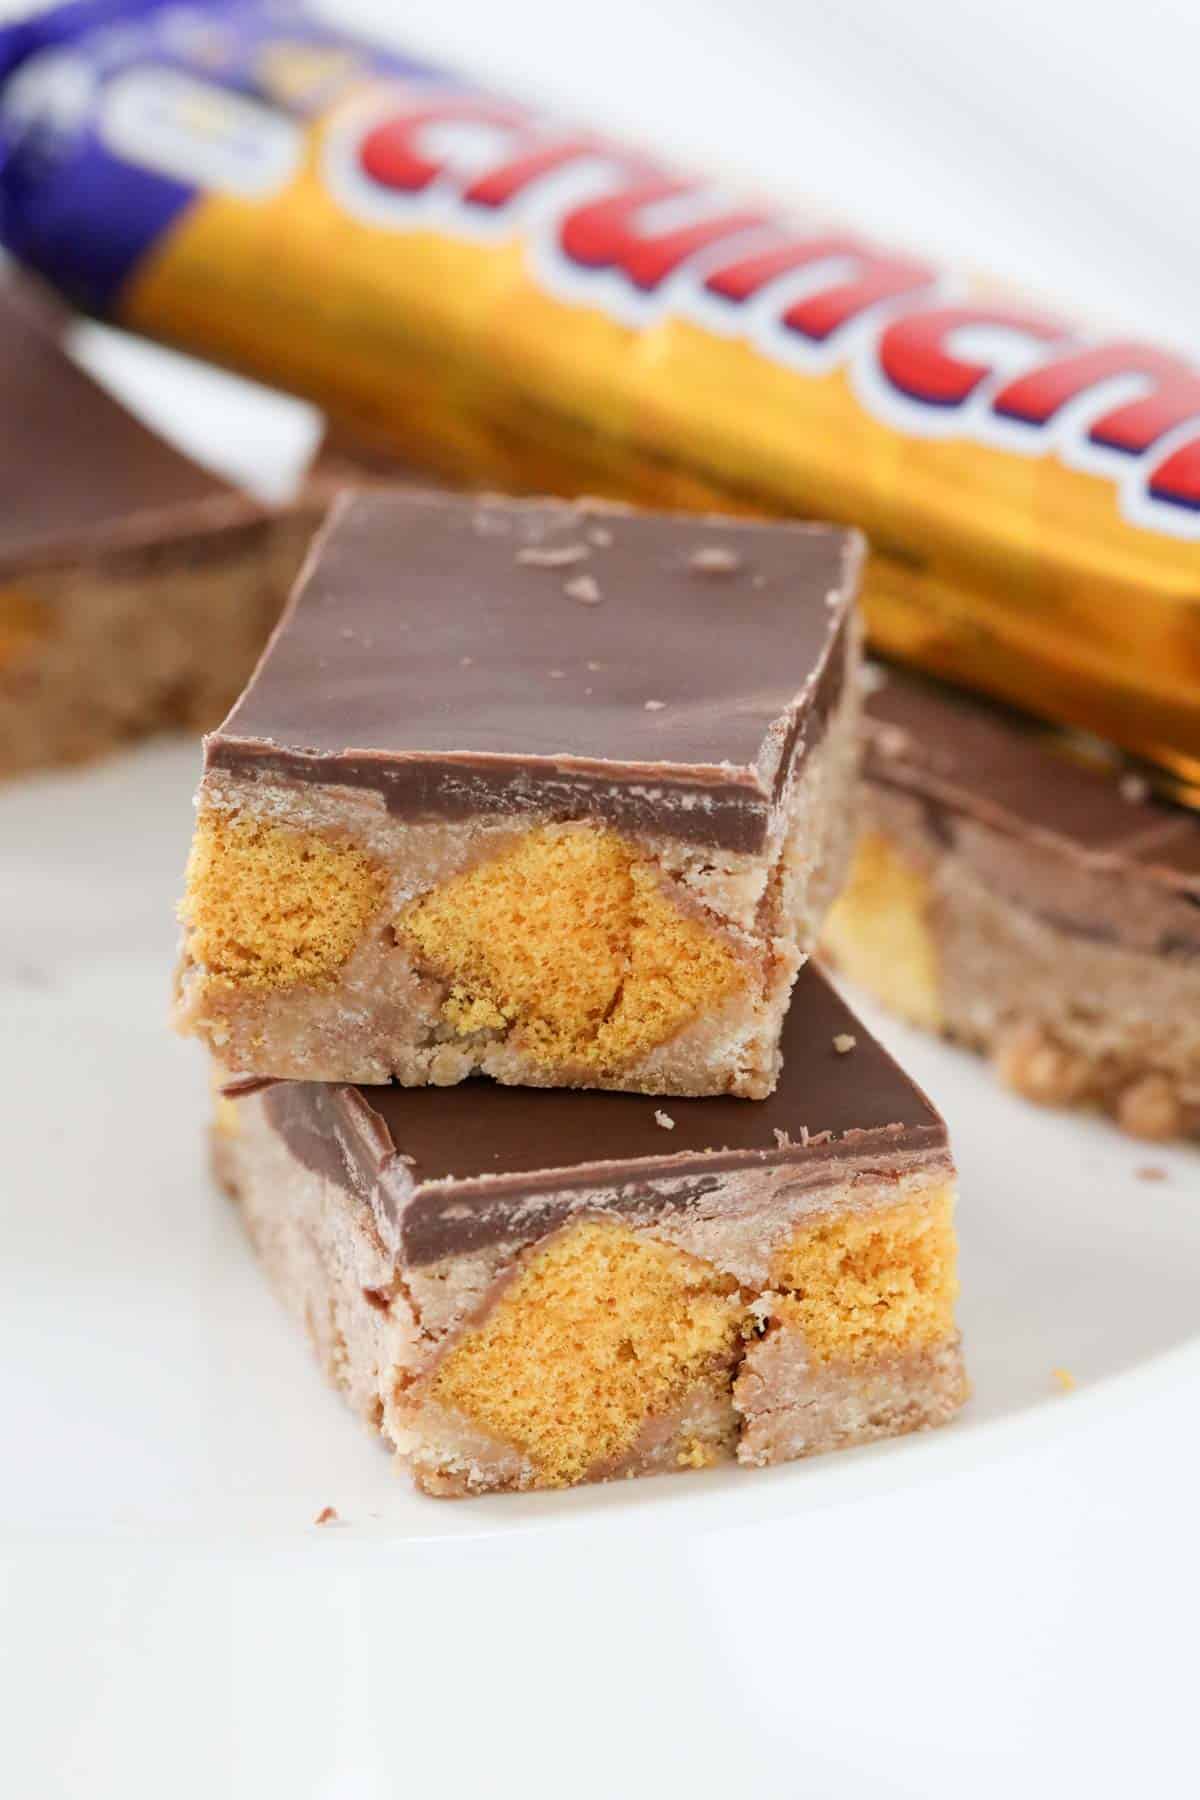 Squares of Crunchie slice in front of a Crunchie bar.